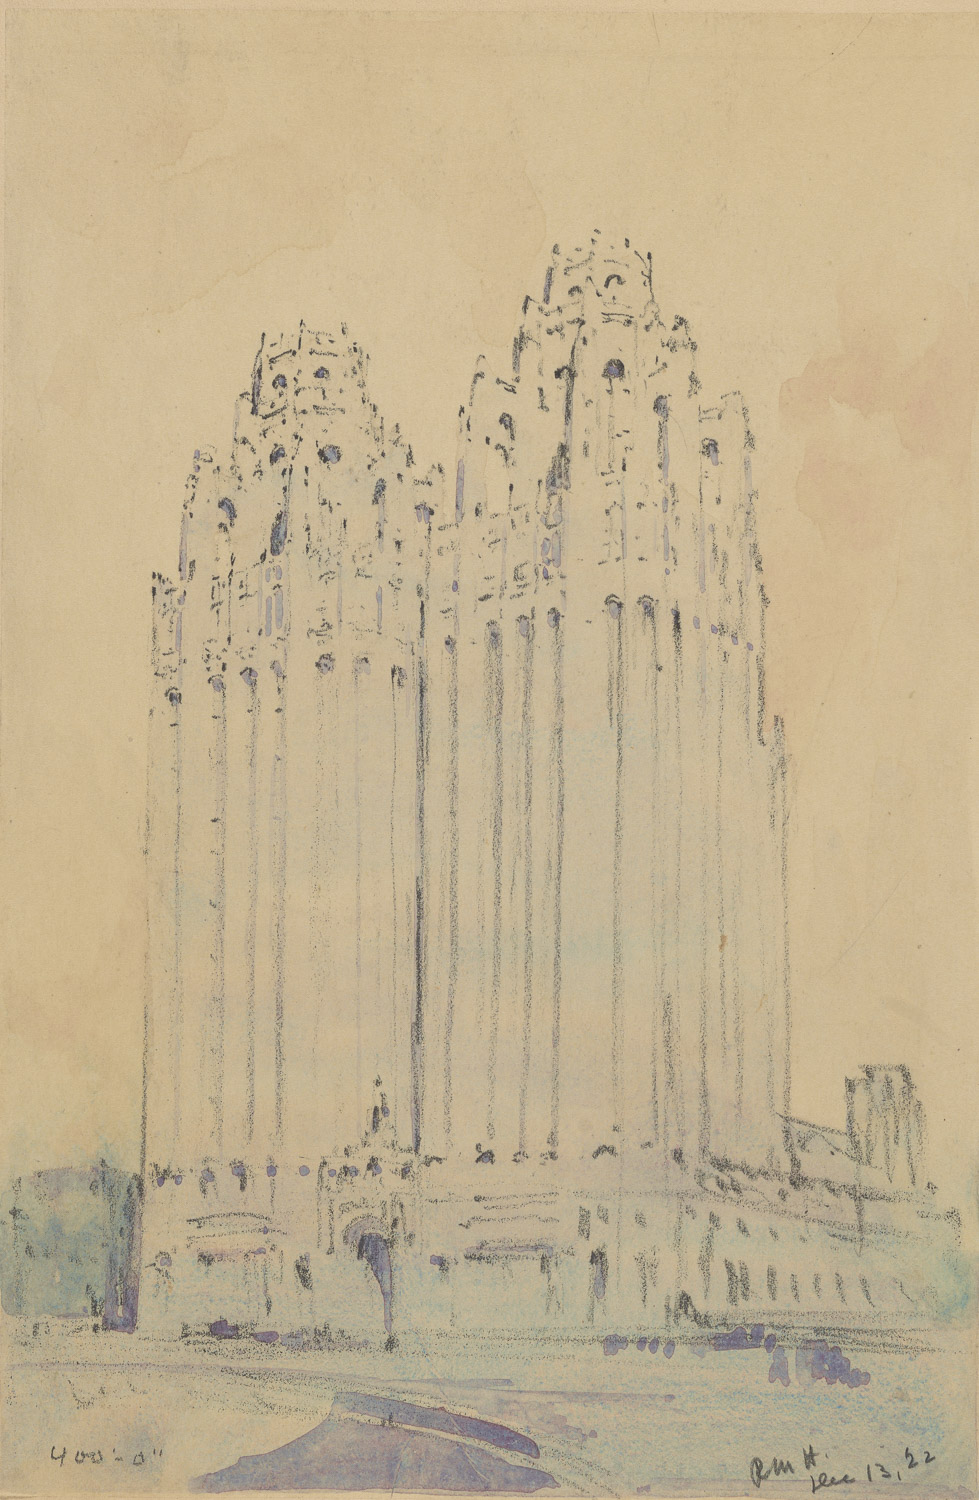 A drawing of two identical Chicago Tribune skyscrapers side by side. They share a single entrance, but otherwise resemble the tower as built. The exterior of the building is highlighted by small splotches of purple wash representing shadows and areas of light blue crayon or colored pencil.